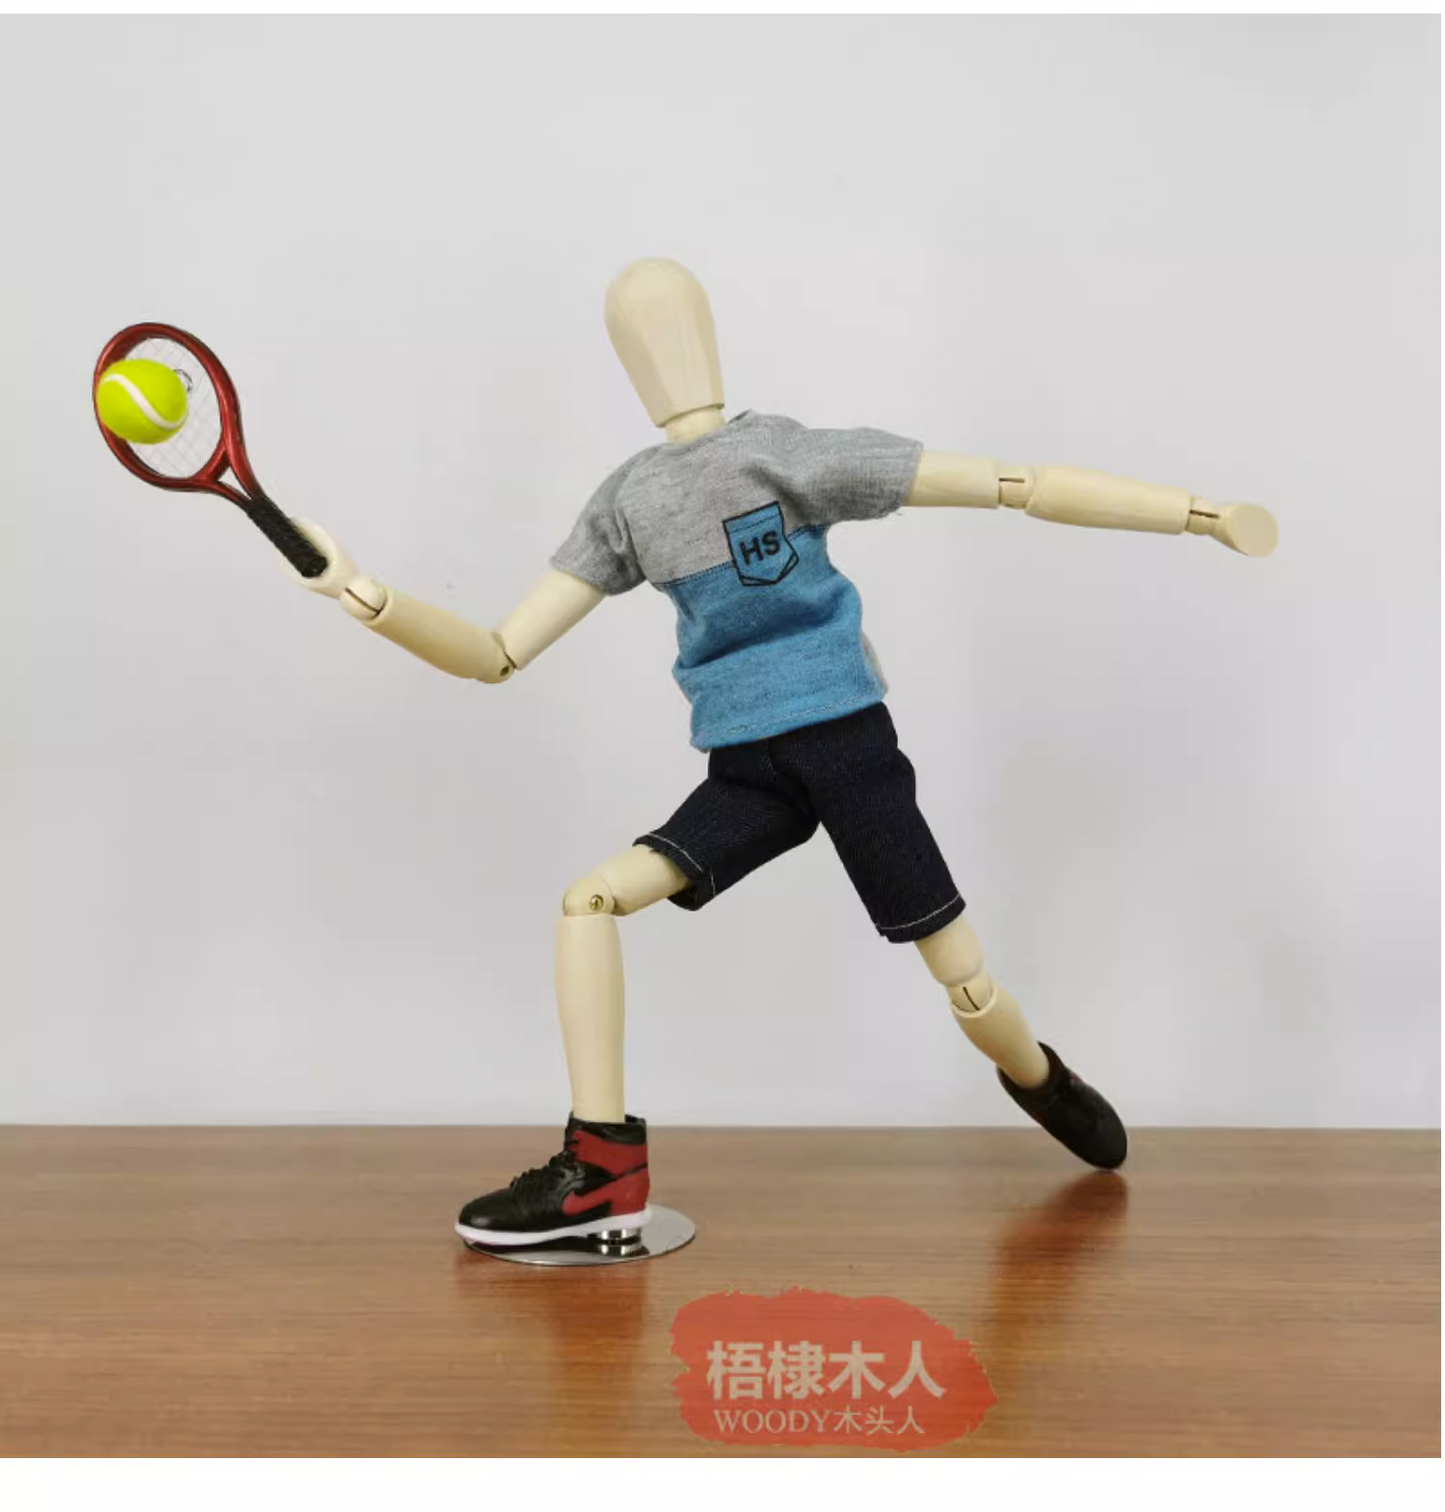 Wooden figure playing tennis （Height 30 CM）Blue Clothing  Gift Package